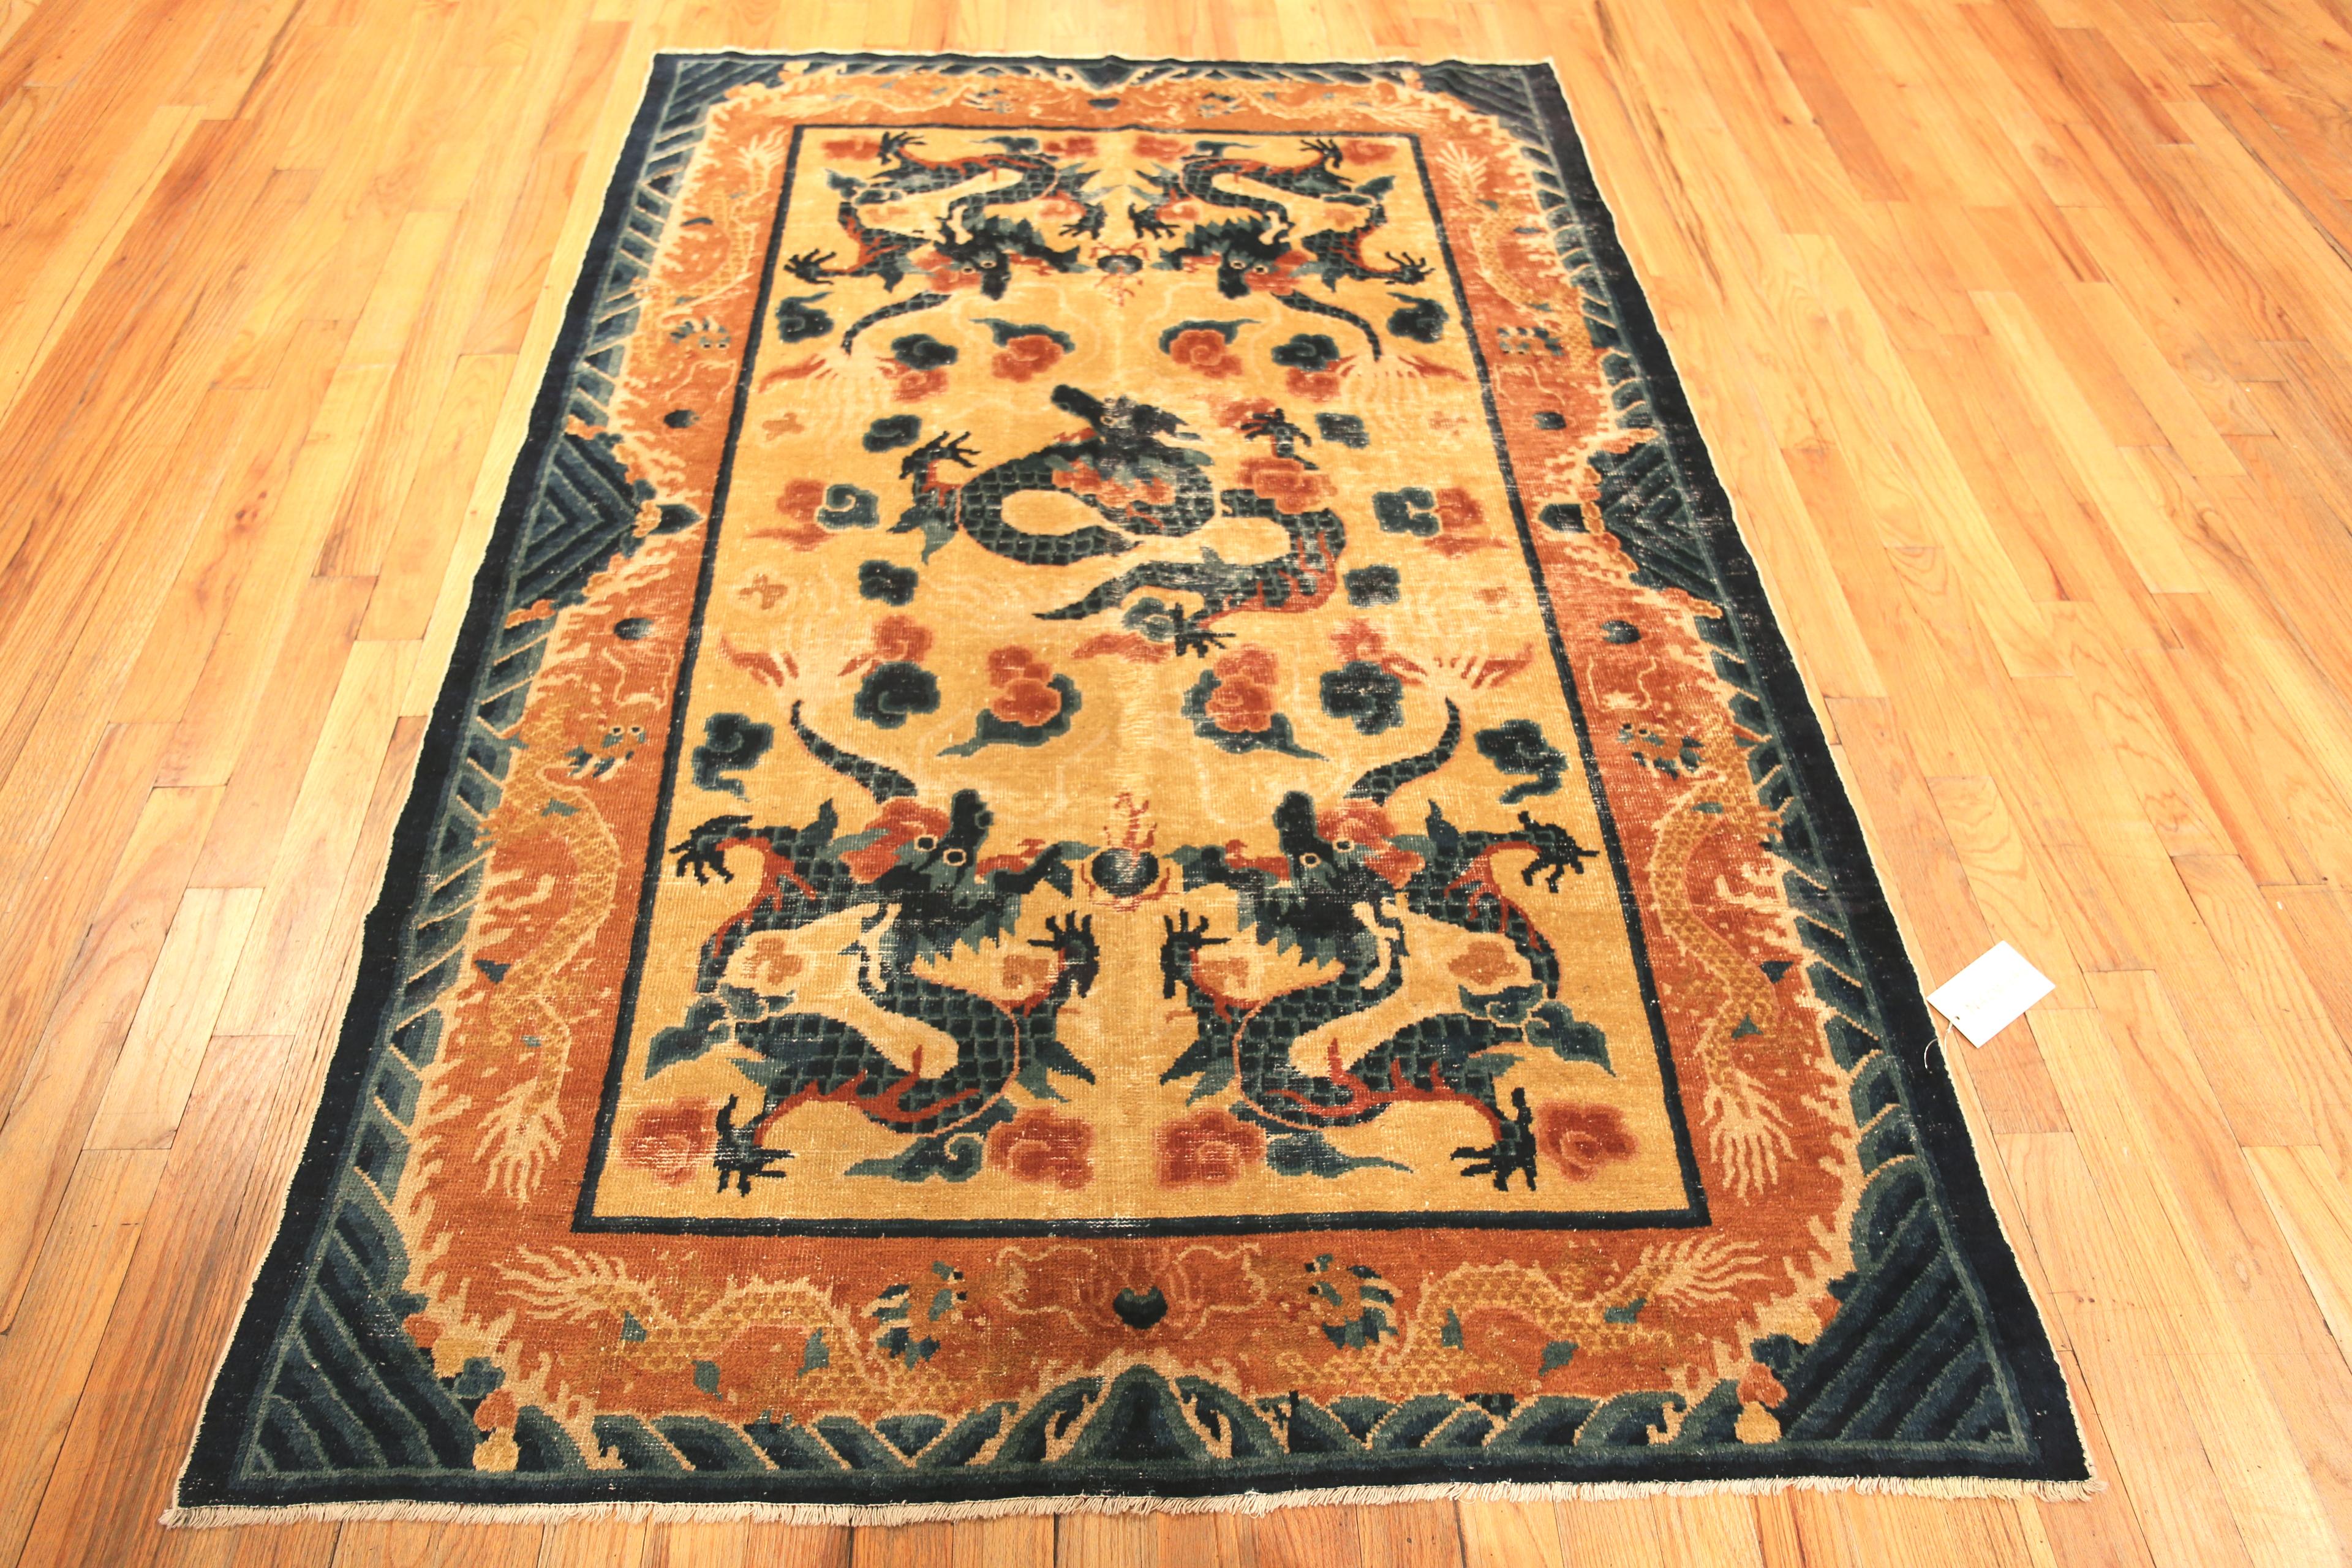 Artistic Antique Chinese Five Claw Dragon Design Shabby Chic Rug, Country of Origin: China, Circa date: 1880. Size: 5 ft 3 in x 7 ft 8 in (1.6 m x 2.34 m)
 